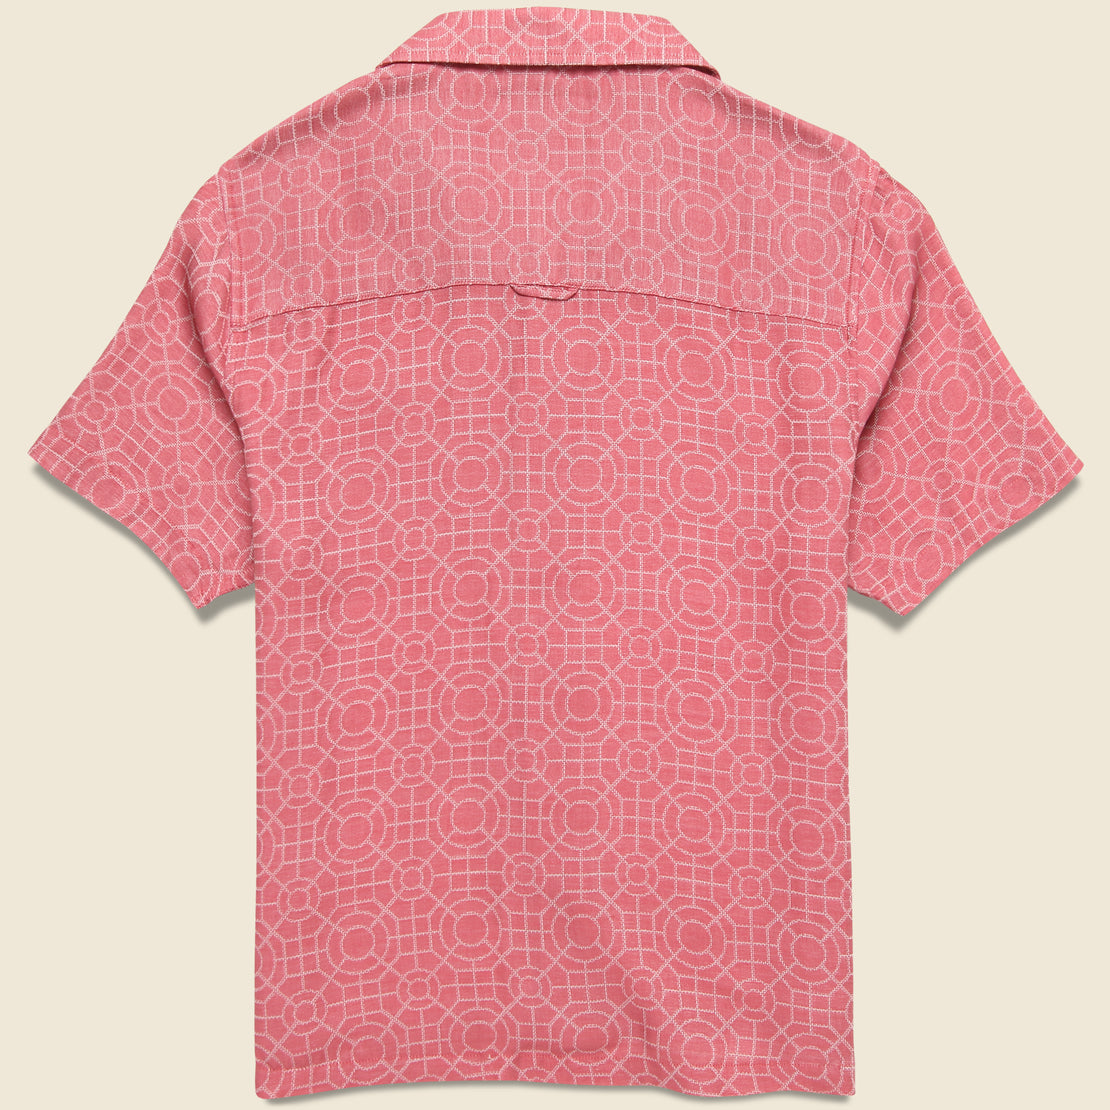 Selleck Shirt - Baroque Rose - Far Afield - STAG Provisions - Tops - S/S Woven - Other Pattern